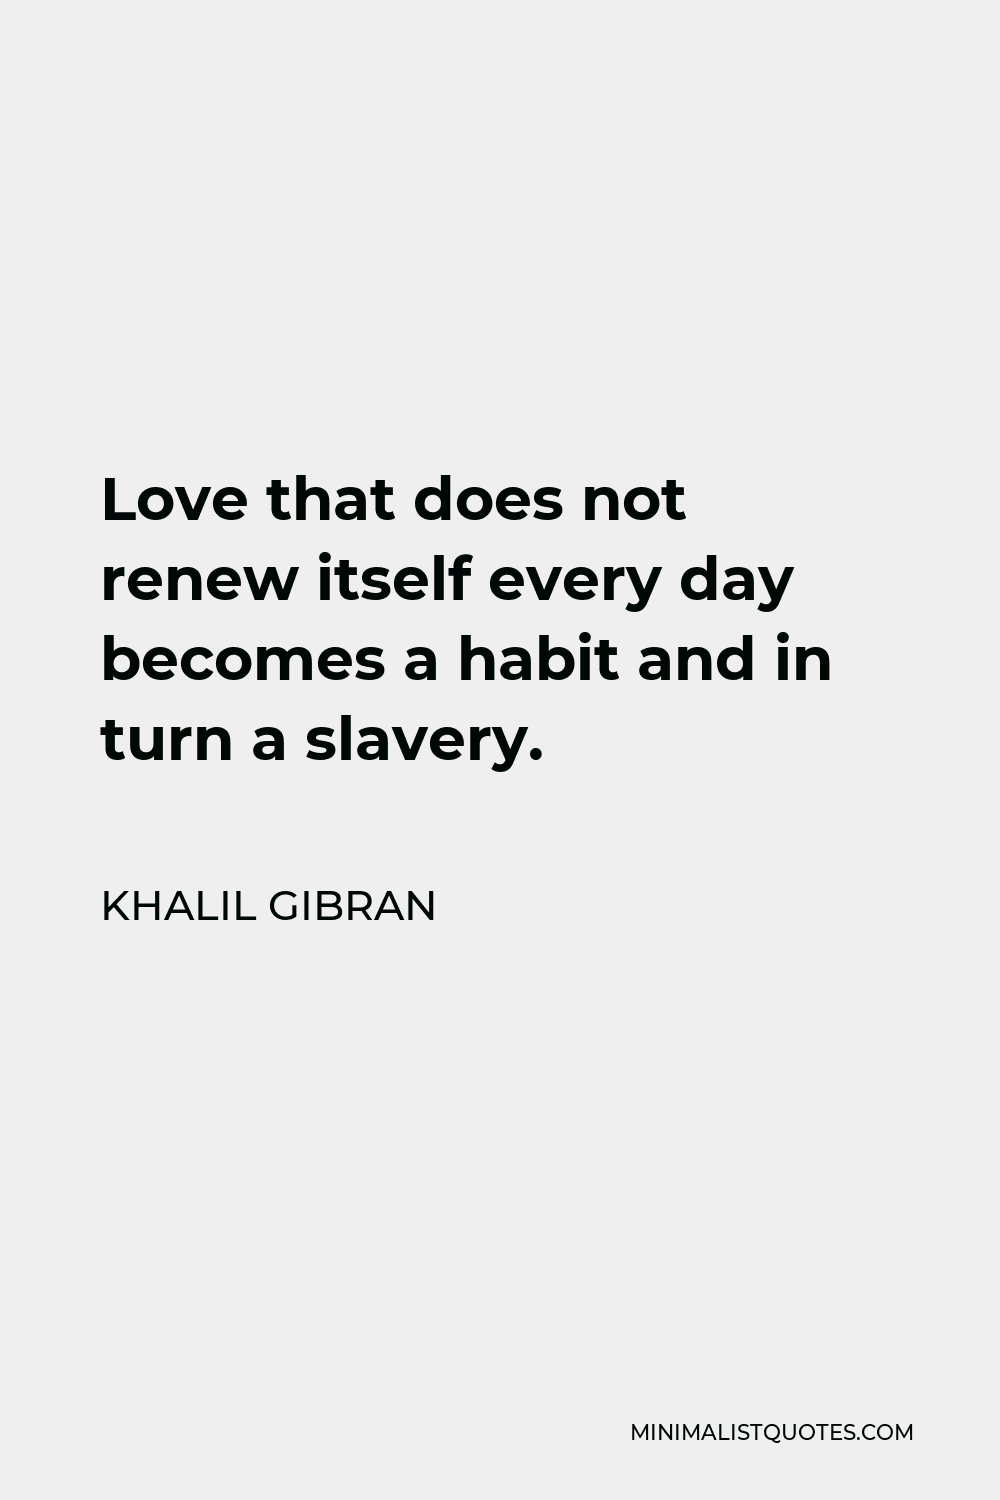 Khalil Gibran Quote - Love that does not renew itself every day becomes a habit and in turn a slavery.